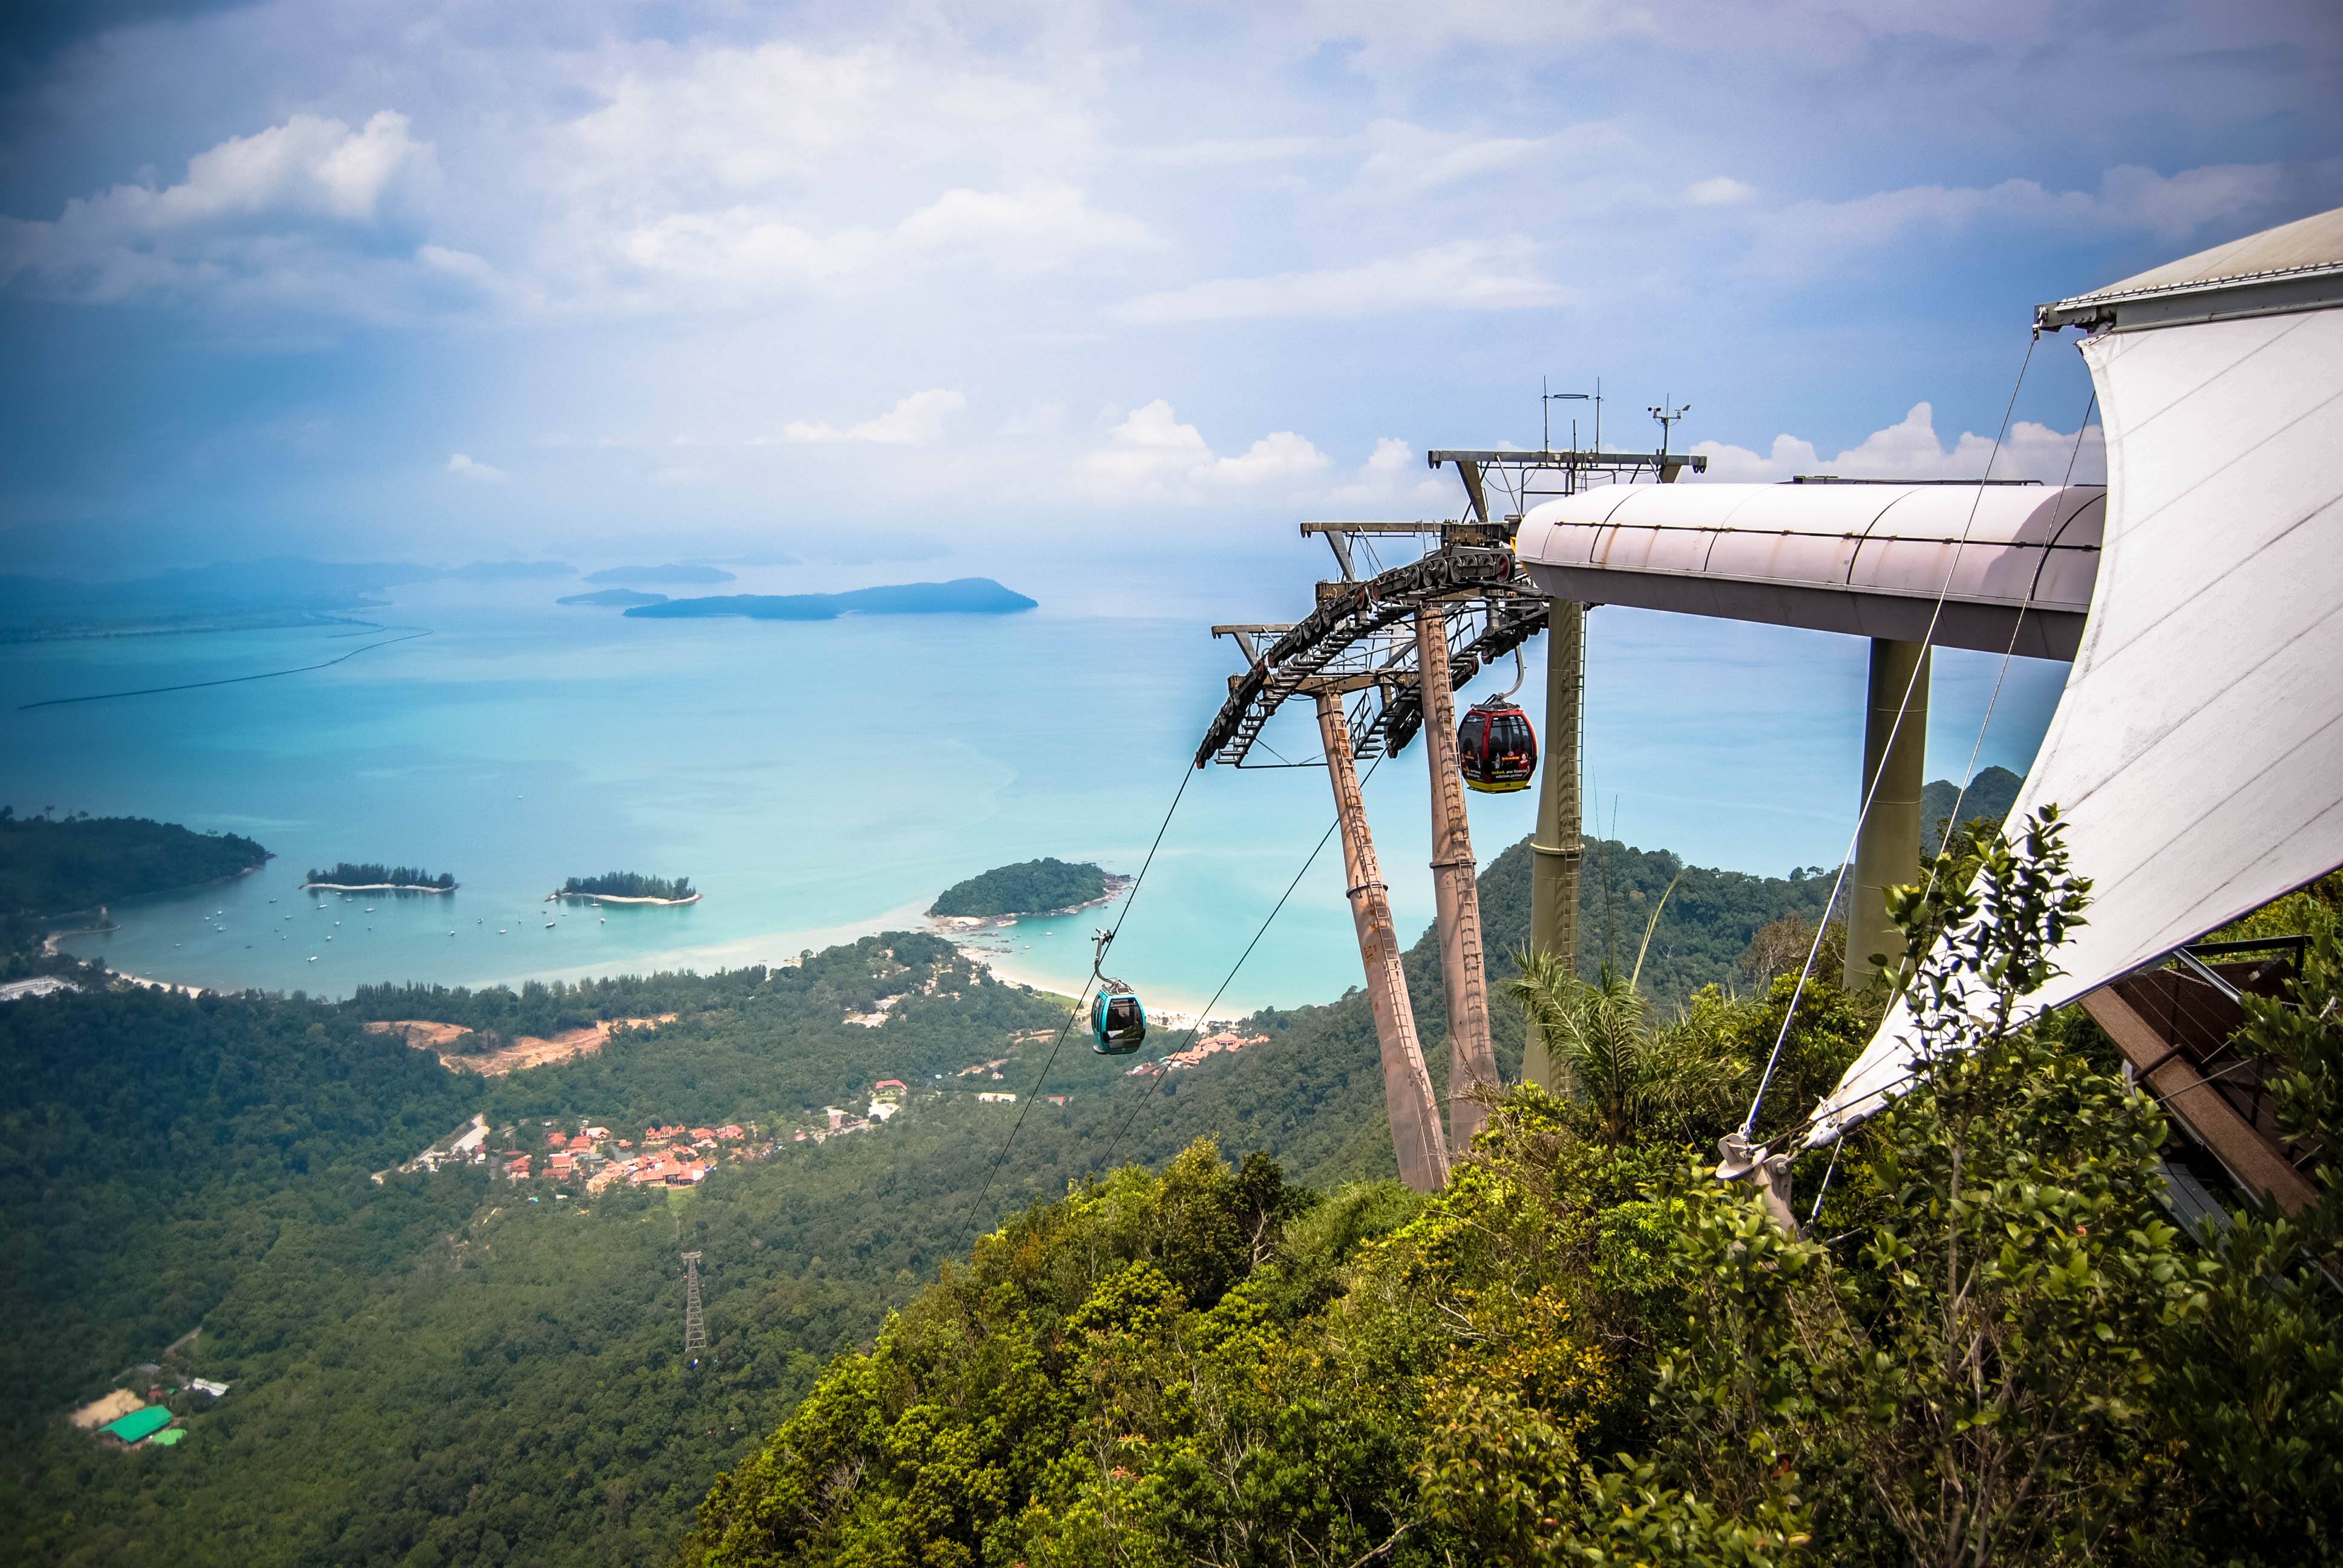 Malaysia is known for great food, a mix of many cultures, and truly stunning beaches